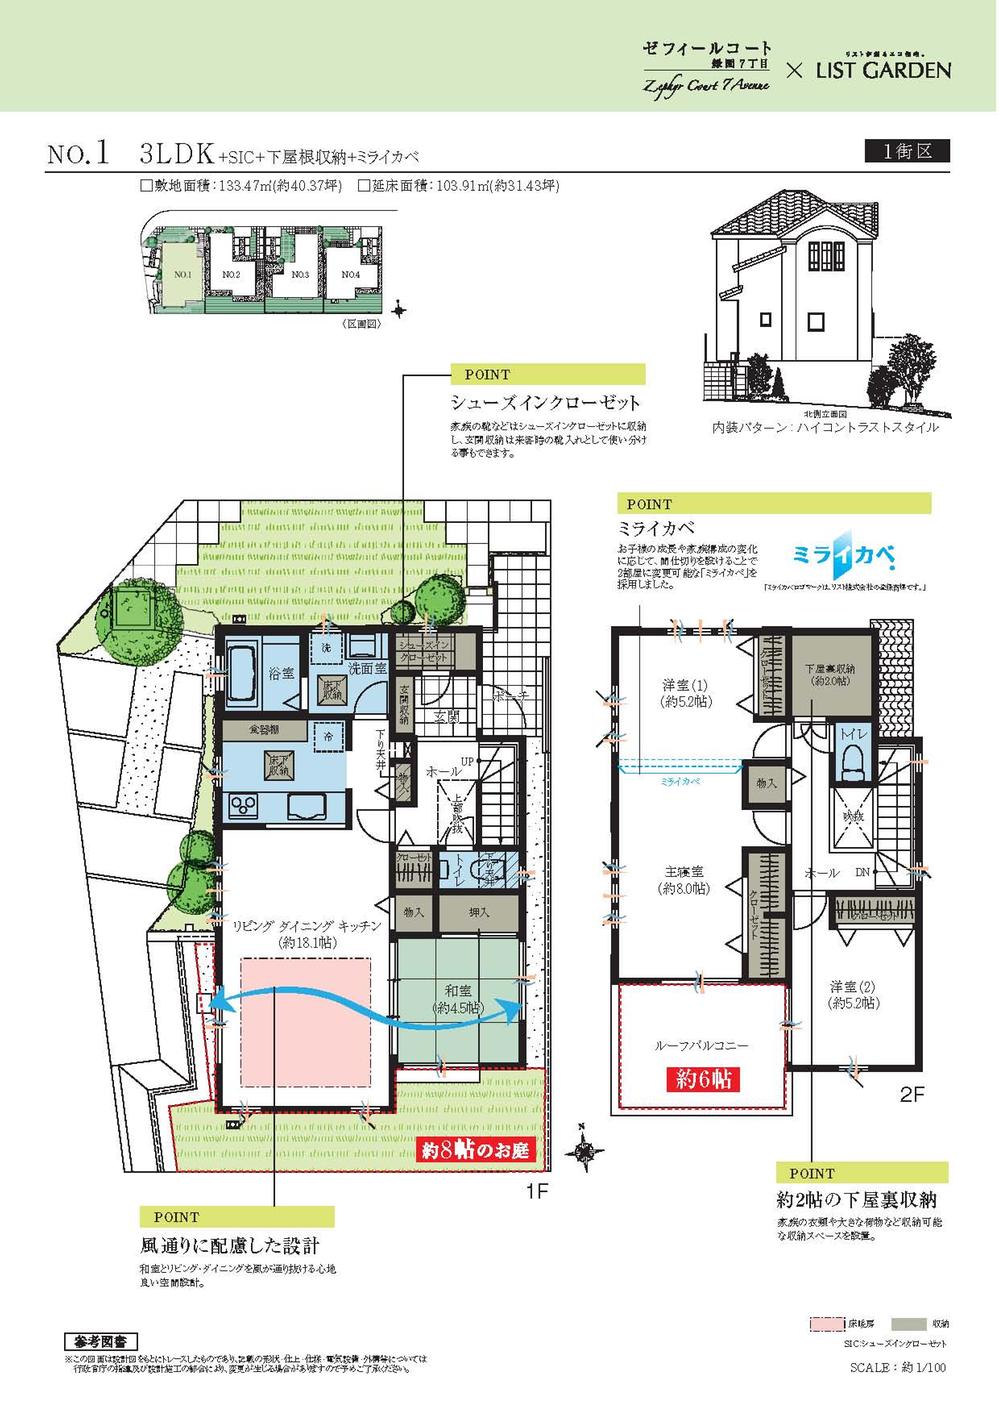 Floor plan. Also safe for children there is a sidewalk up to 1030m Station to Ryokuentoshi.